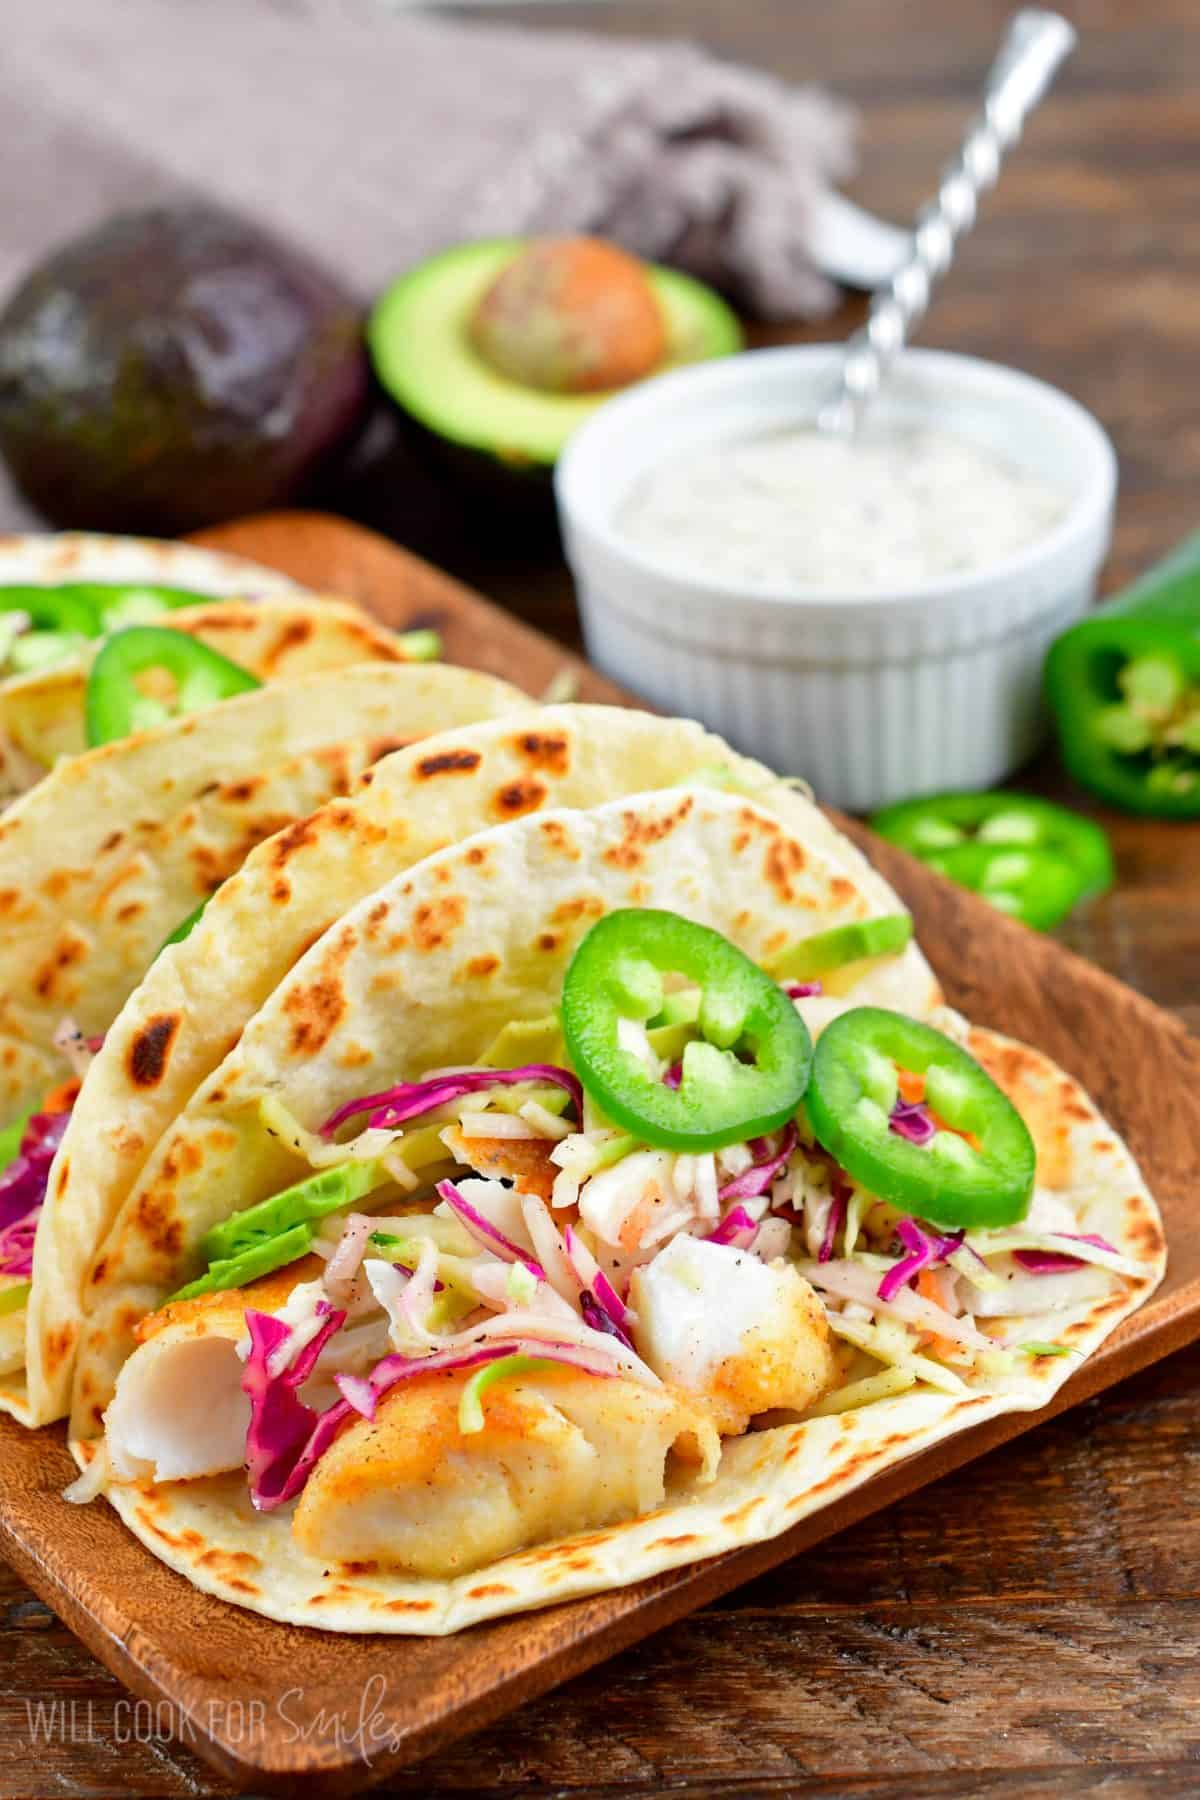 Fried fish tacos in a flour tortilla with jalapenos, cabbage, and avocado on a wood tray.